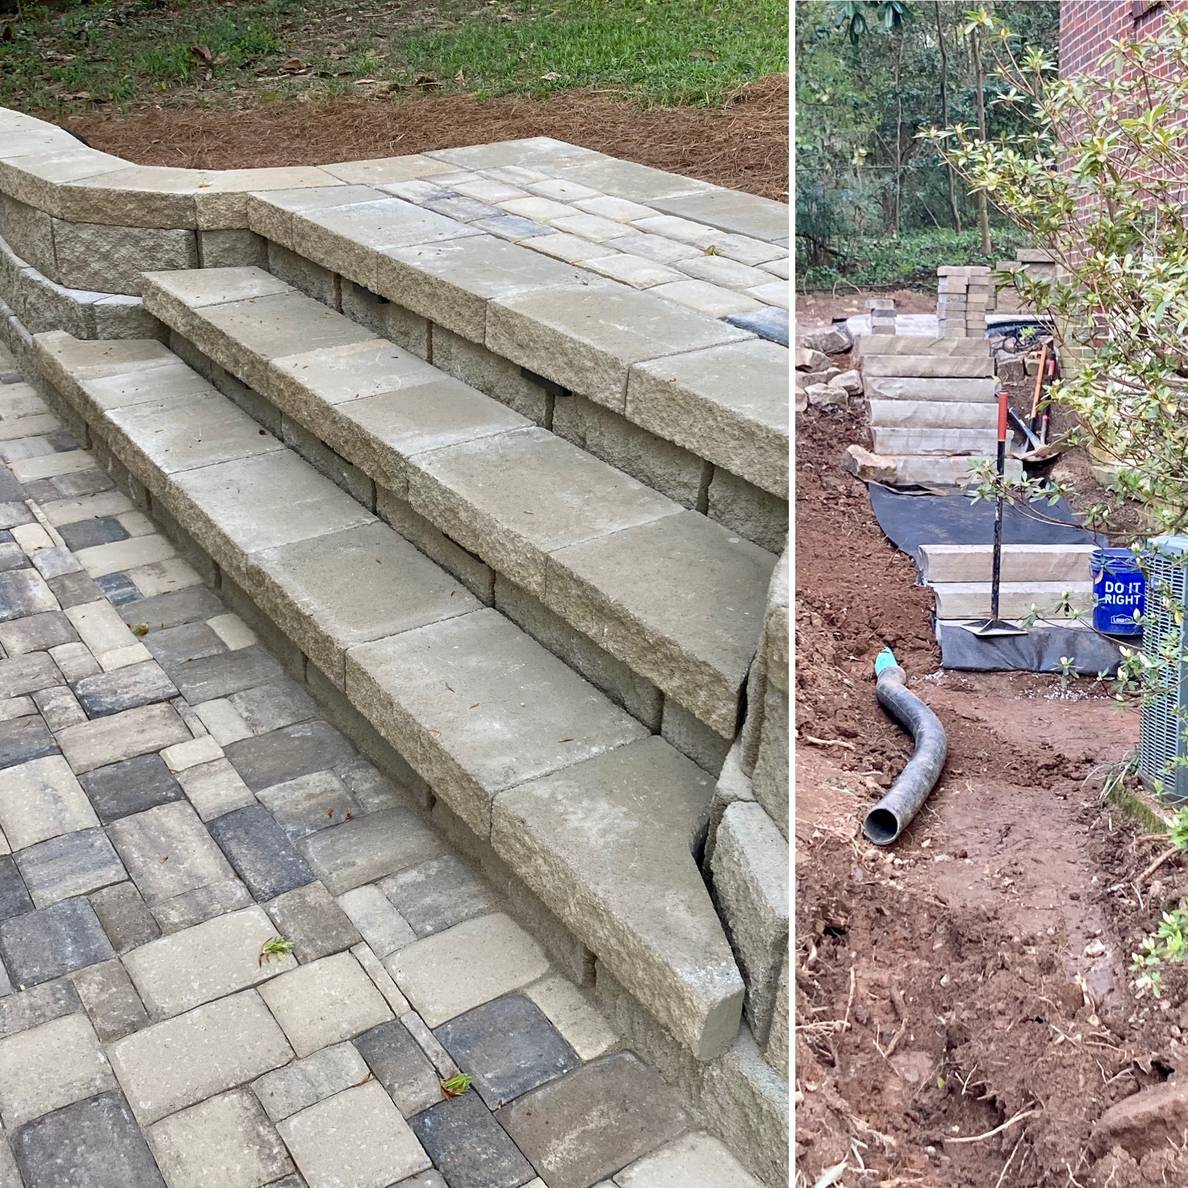 Two photos: the first is of some retaining wall steps with pavers for the top landing and a paver path in front. The second is of some stone treads and green pipe along a clay slope.